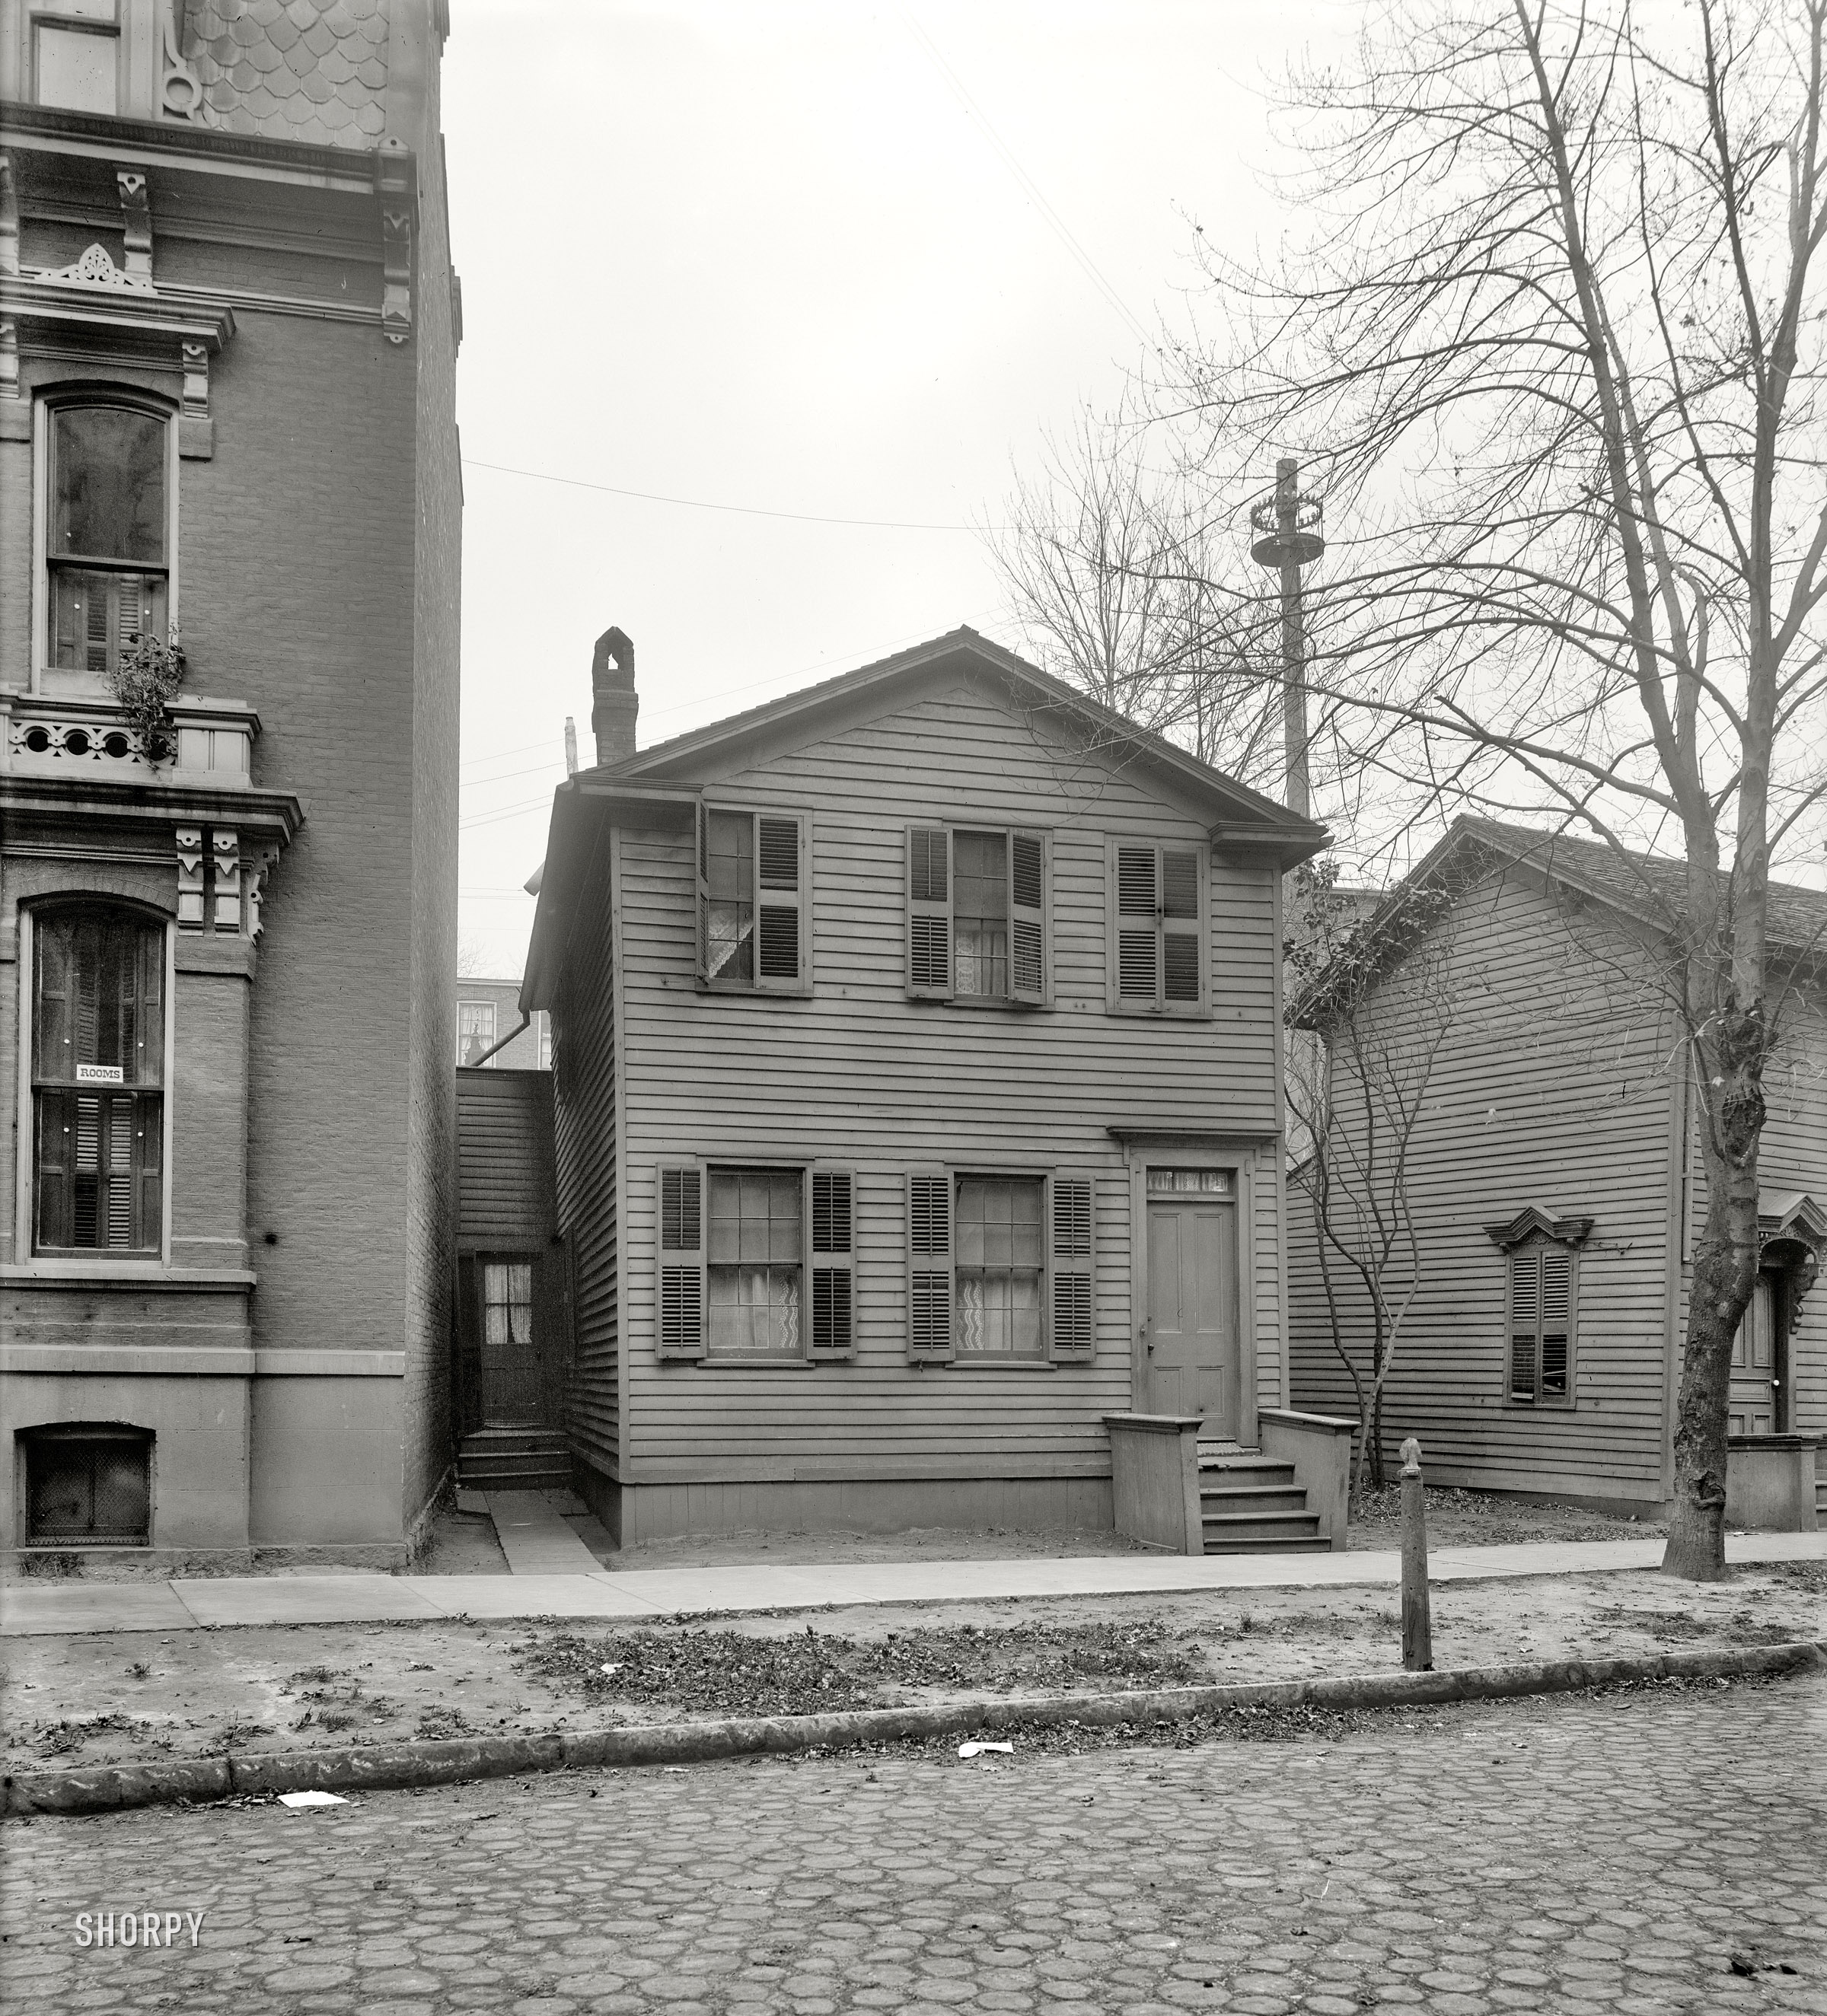 Detroit, Michigan, circa 1910. "No. 33 Center Street." Why this little house is in the Detroit Publishing archive is a mystery to me. Note yet another of those maypole-style telephone line drops. 8x10 glass negative. View full size.